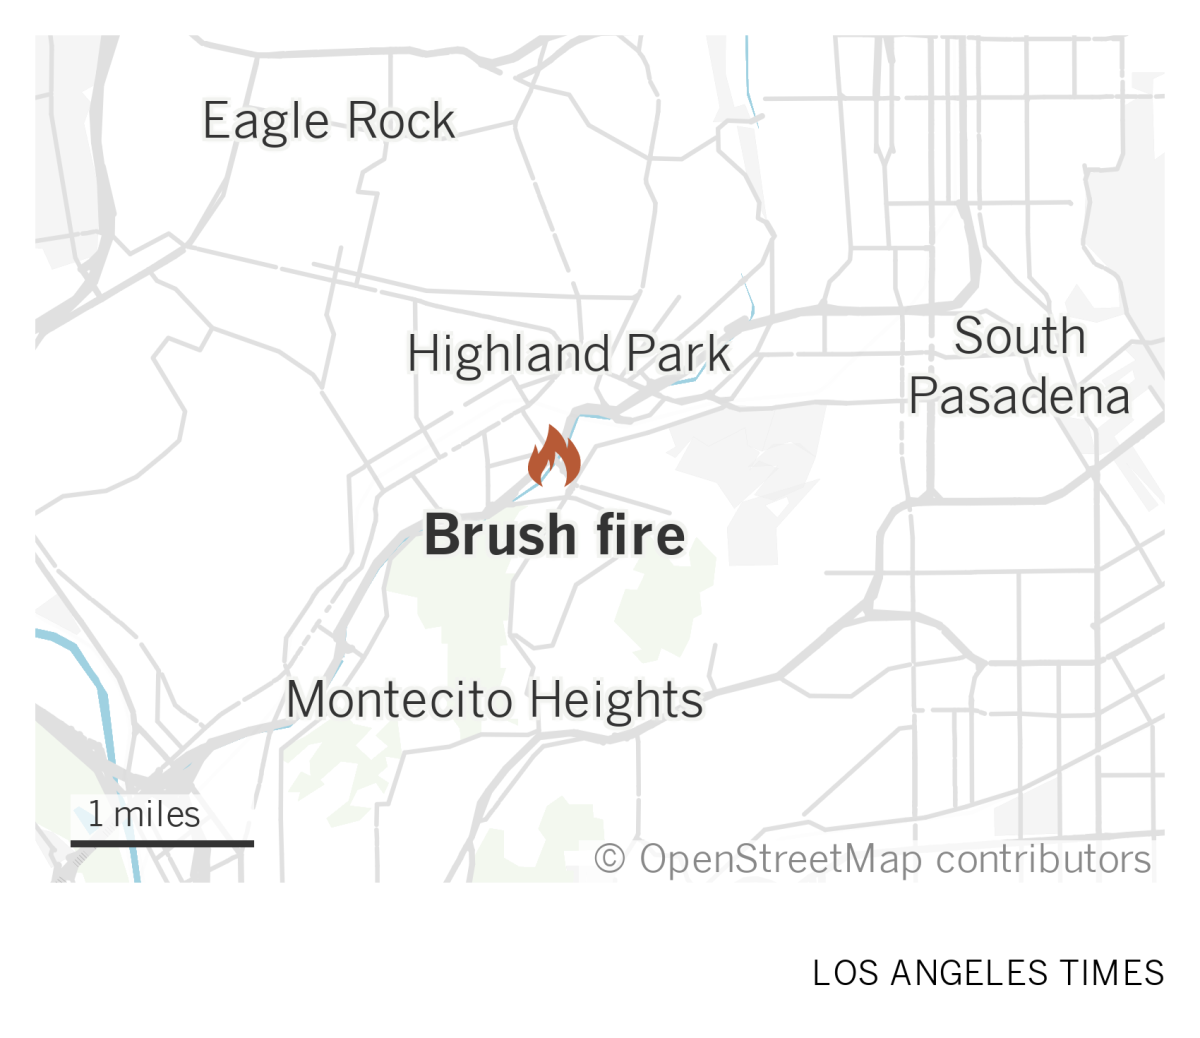 A map of Northeast Los Angeles shows where a brush fire was burning near the 110 Freeway in Highland Park